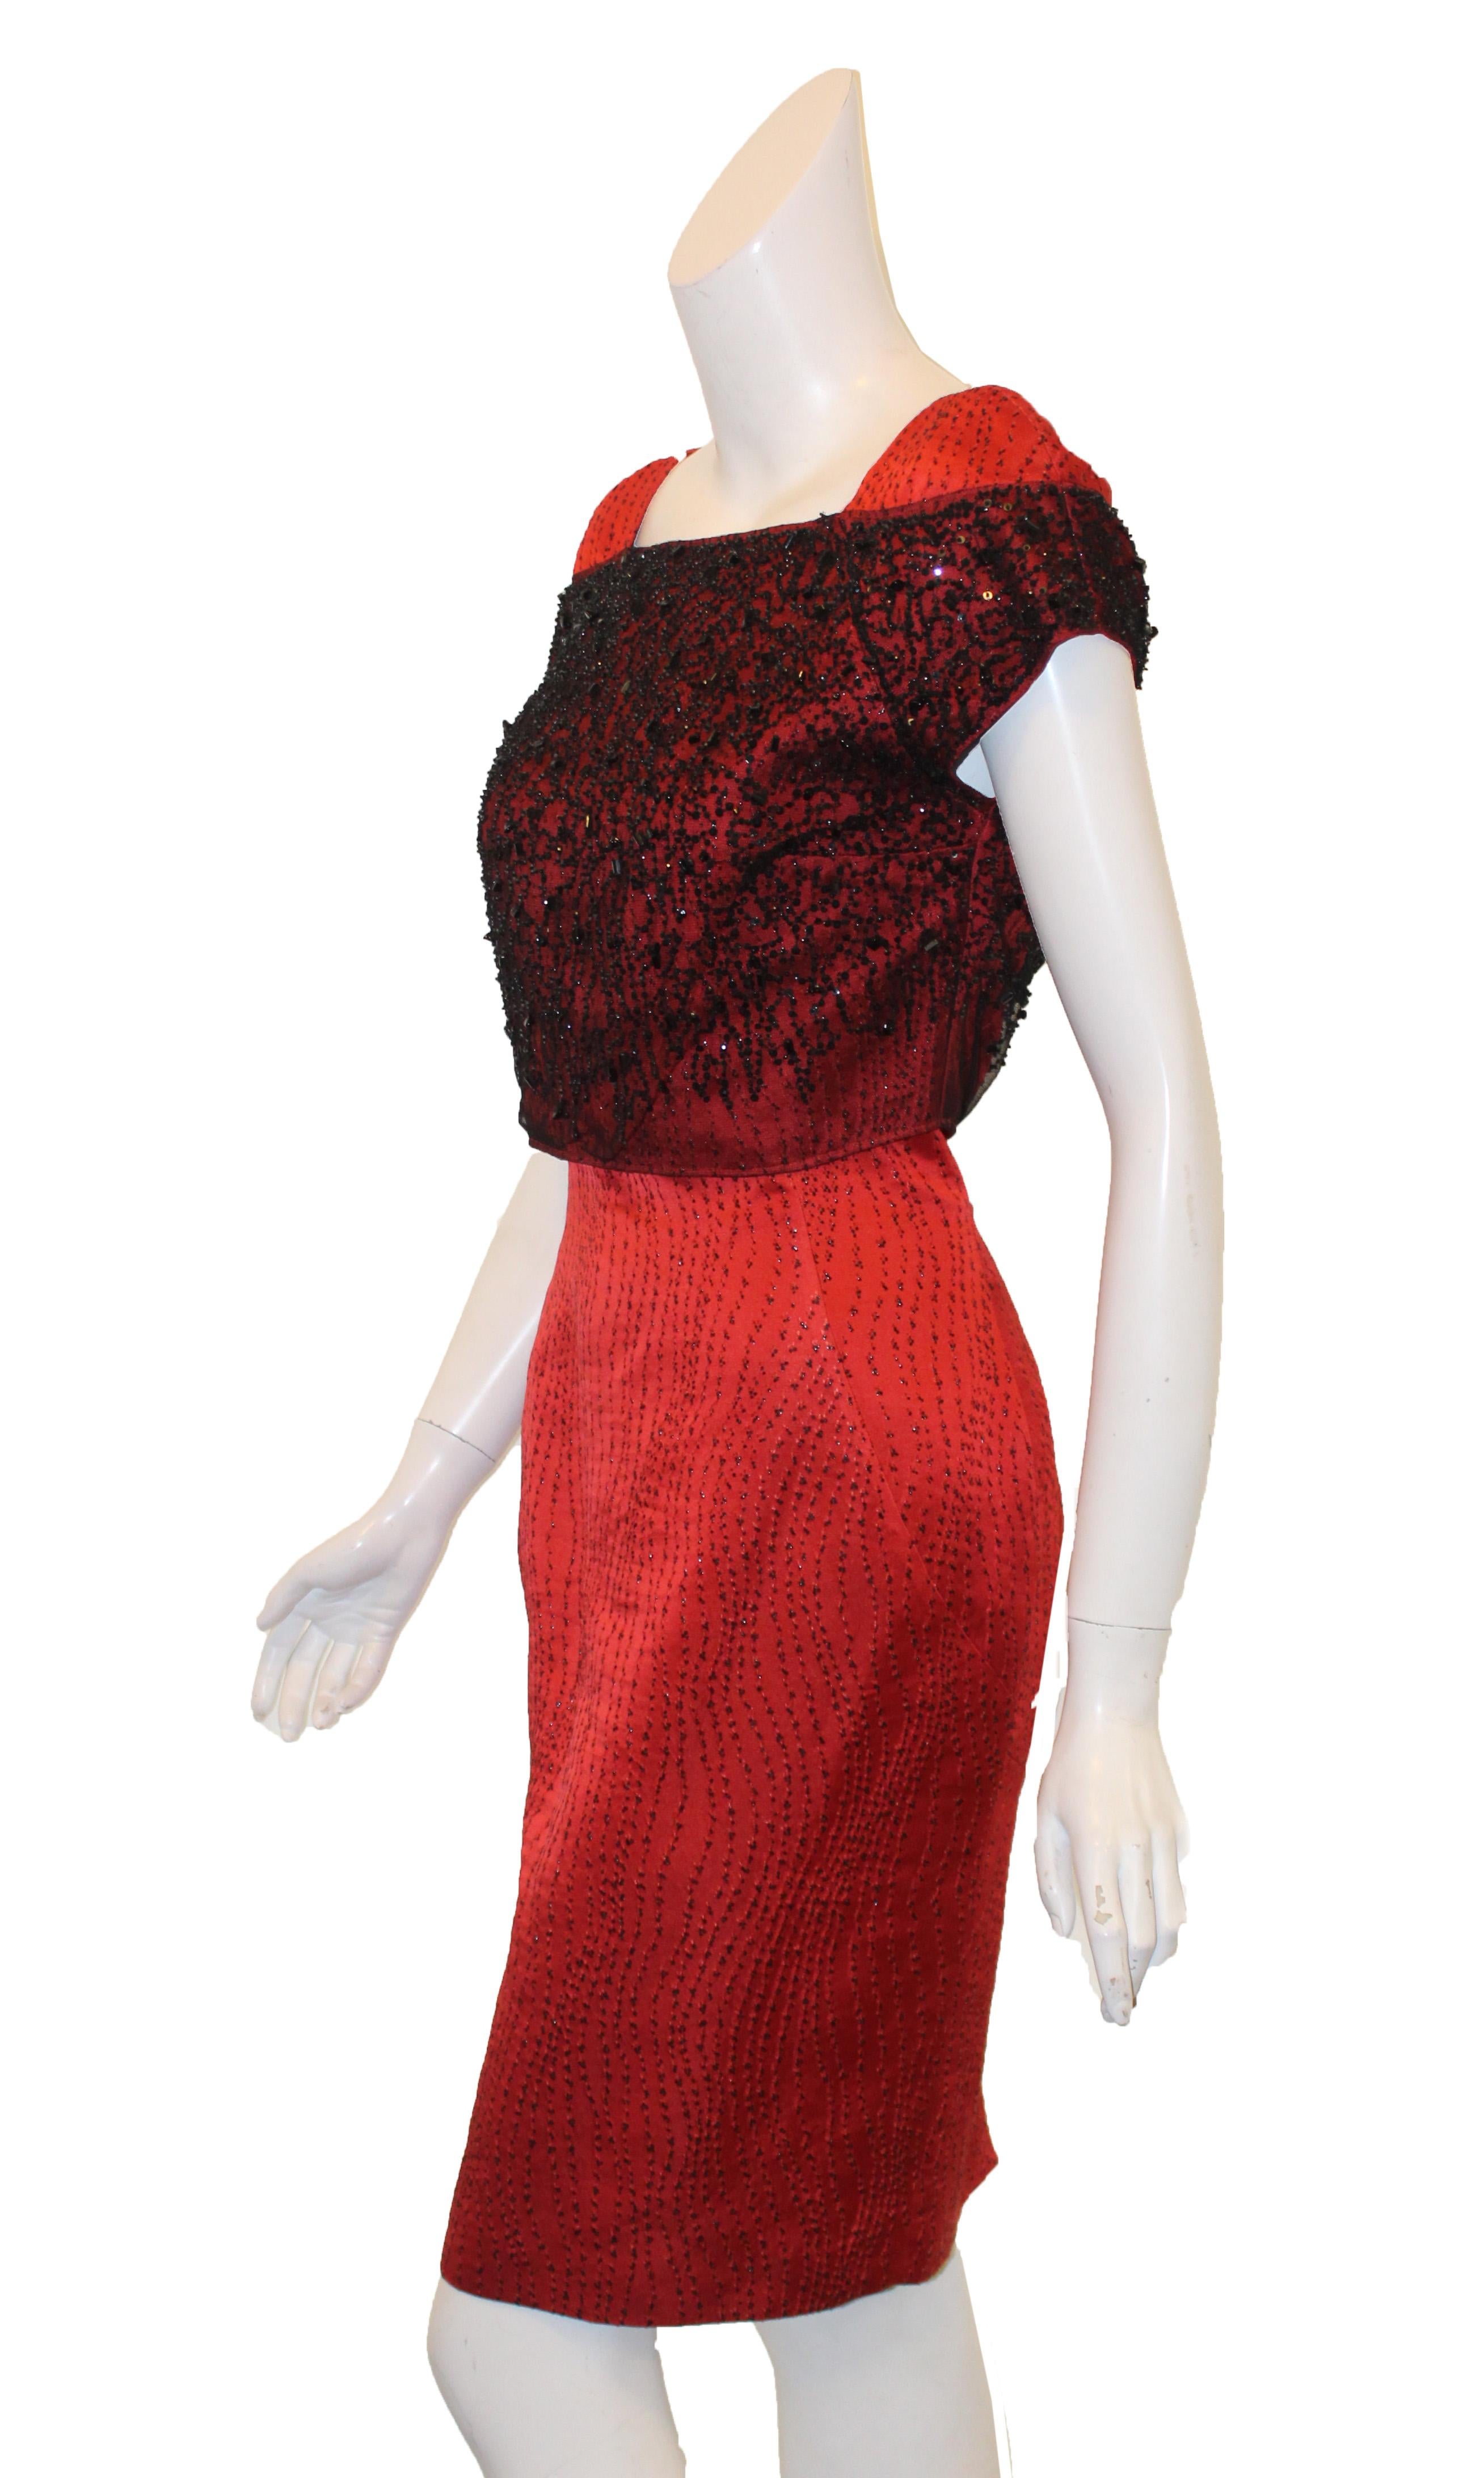 Luca Luca red and black two piece dress ensemble includes a sequined beaded bolero jacket and a strapless dress.  The fabric design on the dress are vertical embroidered threads in red and black cascading down the dress.  The bolero jacket has a